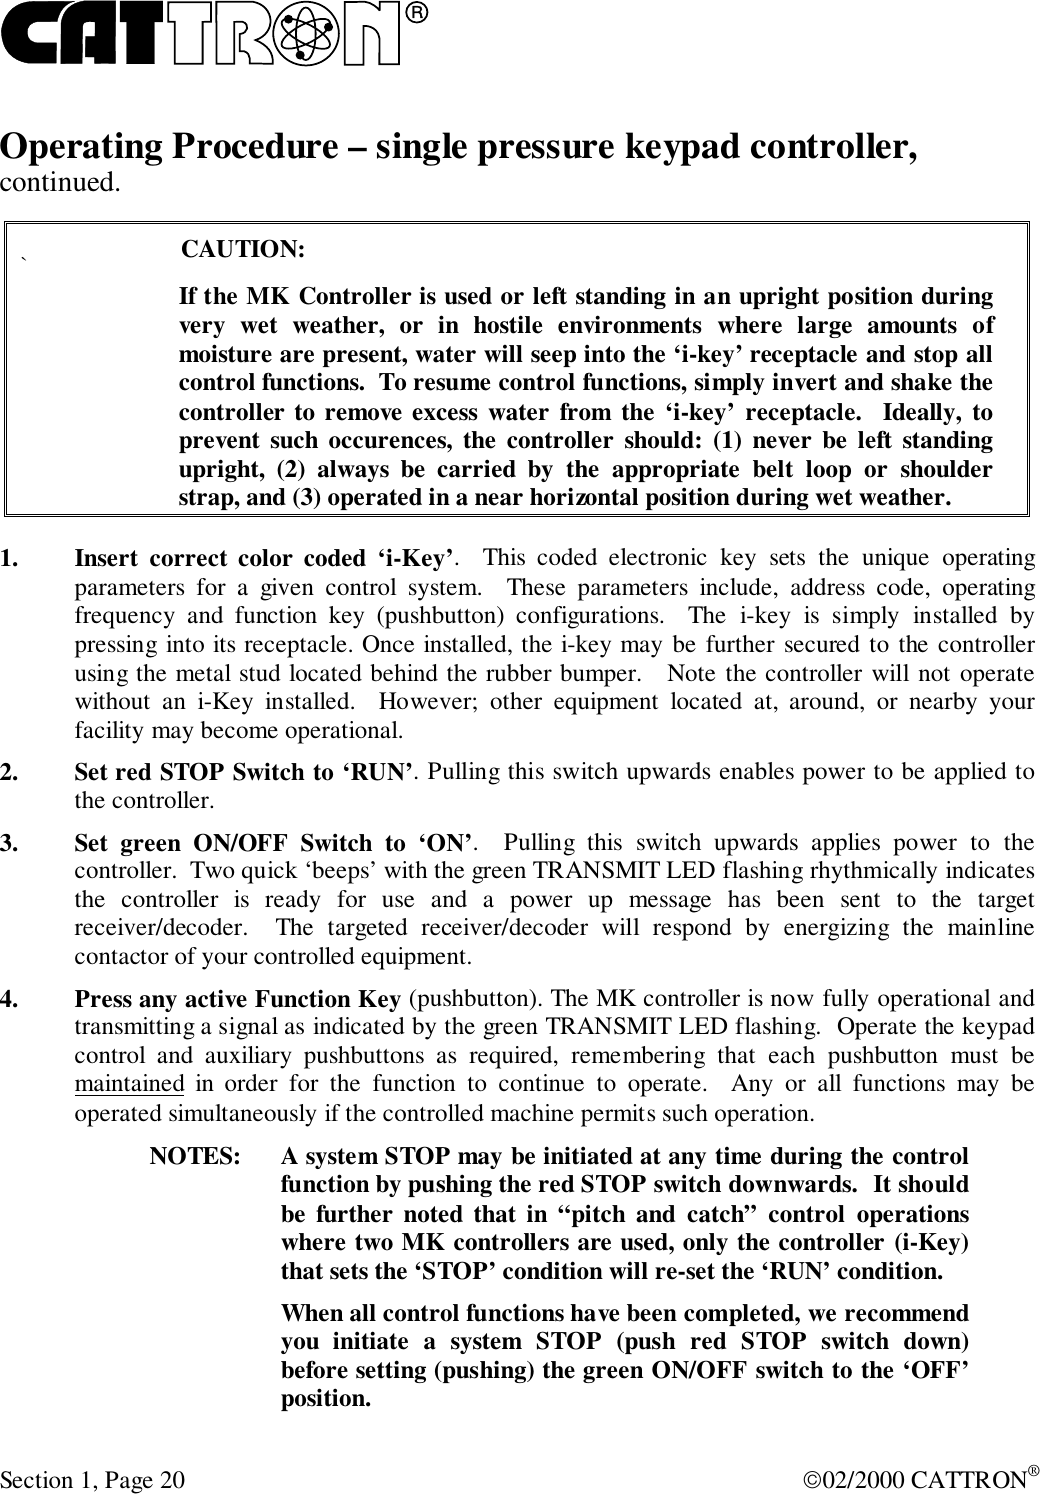 RSection 1, Page 20 02/2000 CATTRON®Operating Procedure – single pressure keypad controller,continued.`CAUTION:If the MK Controller is used or left standing in an upright position duringvery wet weather, or in hostile environments where large amounts ofmoisture are present, water will seep into the ‘i-key’ receptacle and stop allcontrol functions.  To resume control functions, simply invert and shake thecontroller to remove excess water from the ‘i-key’ receptacle.  Ideally, toprevent such occurences, the controller should: (1) never be left standingupright, (2) always be carried by the appropriate belt loop or shoulderstrap, and (3) operated in a near horizontal position during wet weather.1. Insert correct color coded ‘i-Key’.   This coded electronic key sets the unique operatingparameters for a given control system.  These parameters include, address code, operatingfrequency and function key (pushbutton) configurations.  The i-key is simply installed bypressing into its receptacle. Once installed, the i-key may be further secured to the controllerusing the metal stud located behind the rubber bumper.   Note the controller will not operatewithout an i-Key installed.  However; other equipment located at, around, or nearby yourfacility may become operational.2. Set red STOP Switch to ‘RUN’. Pulling this switch upwards enables power to be applied tothe controller.3. Set green ON/OFF Switch to ‘ON’.   Pulling this switch upwards applies power to thecontroller.  Two quick ‘beeps’ with the green TRANSMIT LED flashing rhythmically indicatesthe controller is ready for use and a power up message has been sent to the targetreceiver/decoder.  The targeted receiver/decoder will respond by energizing the mainlinecontactor of your controlled equipment.4. Press any active Function Key (pushbutton). The MK controller is now fully operational andtransmitting a signal as indicated by the green TRANSMIT LED flashing.  Operate the keypadcontrol and auxiliary pushbuttons as required, remembering that each pushbutton must bemaintained in order for the function to continue to operate.  Any or all functions may beoperated simultaneously if the controlled machine permits such operation.NOTES: A system STOP may be initiated at any time during the controlfunction by pushing the red STOP switch downwards.  It shouldbe further noted that in “pitch and catch” control operationswhere two MK controllers are used, only the controller (i-Key)that sets the ‘STOP’ condition will re-set the ‘RUN’ condition.When all control functions have been completed, we recommendyou initiate a system STOP (push red STOP switch down)before setting (pushing) the green ON/OFF switch to the ‘OFF’position.